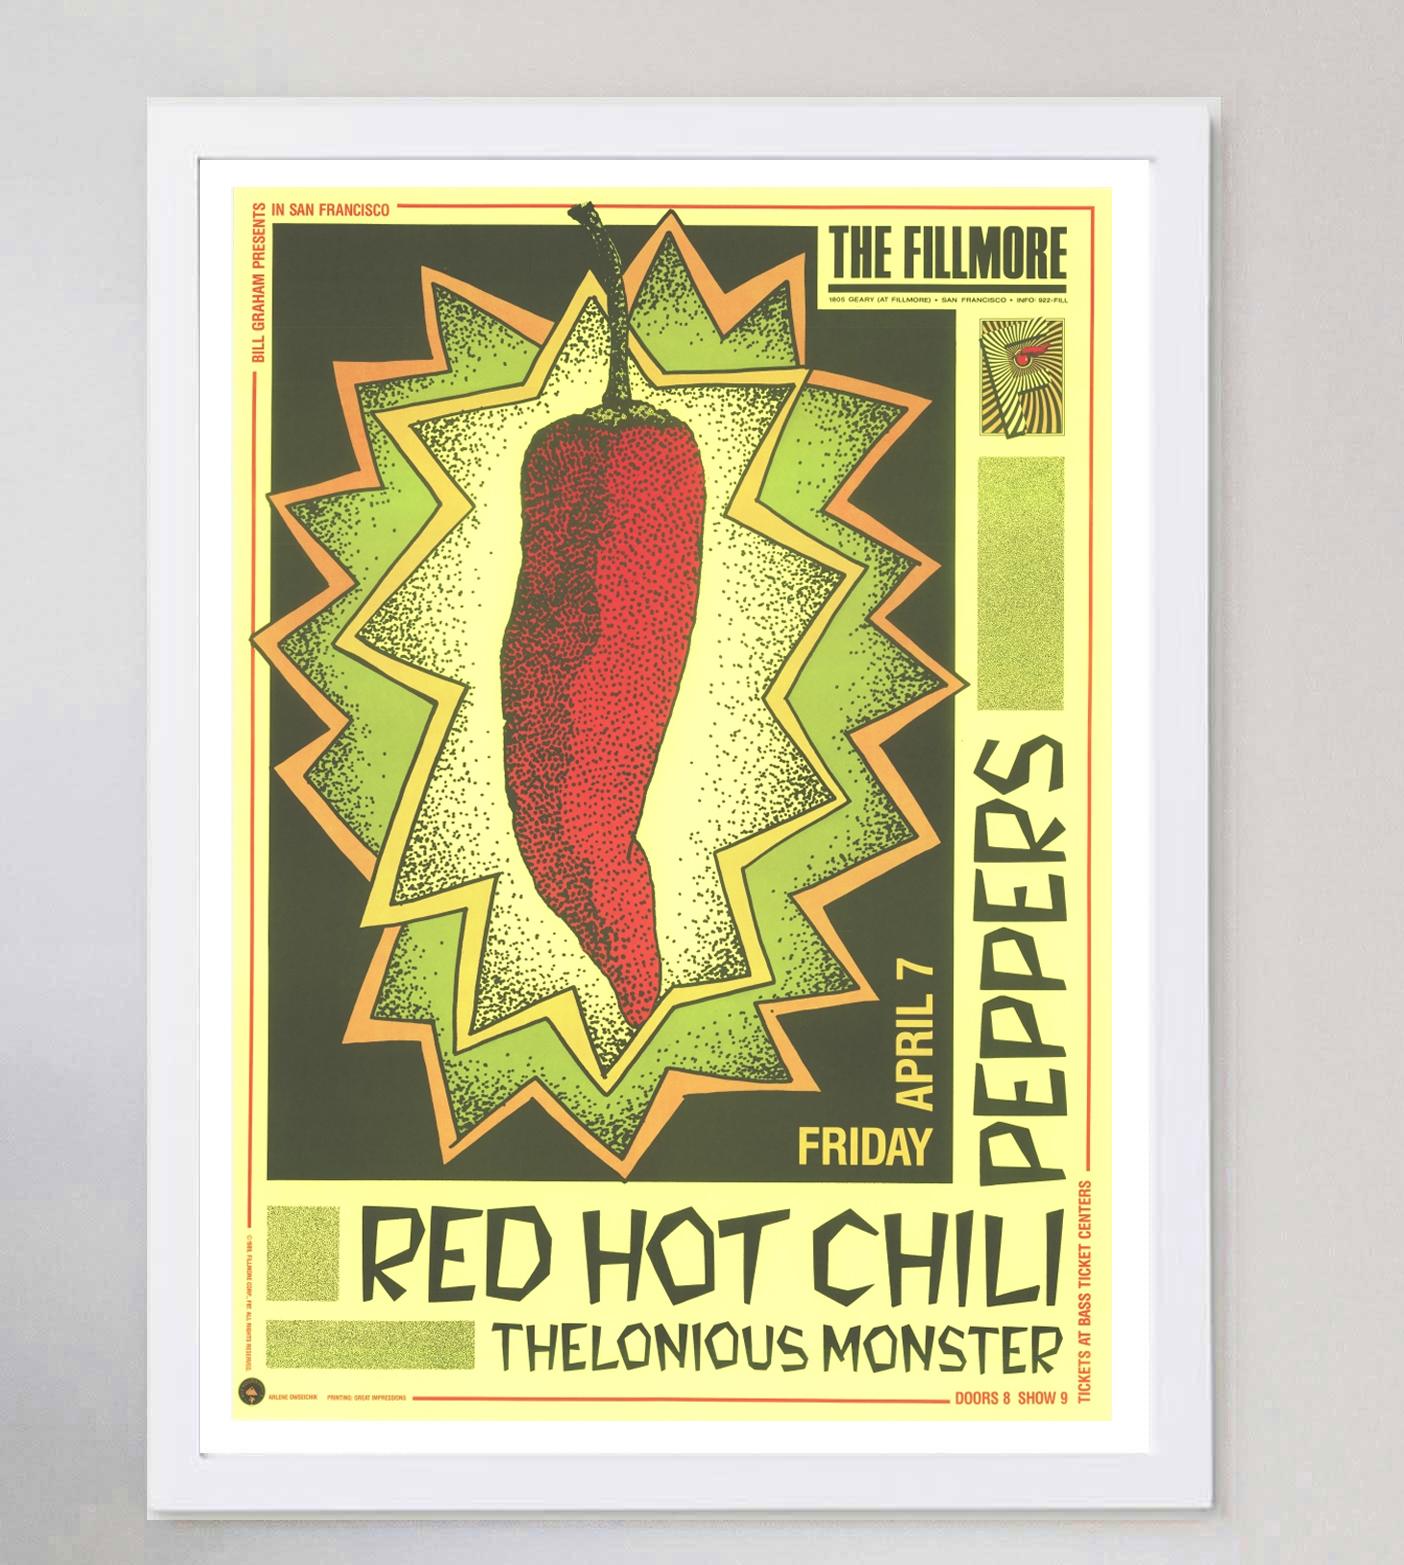 American 1989 Red Hot Chili Peppers - The Fillmore Original Vintage Poster For Sale